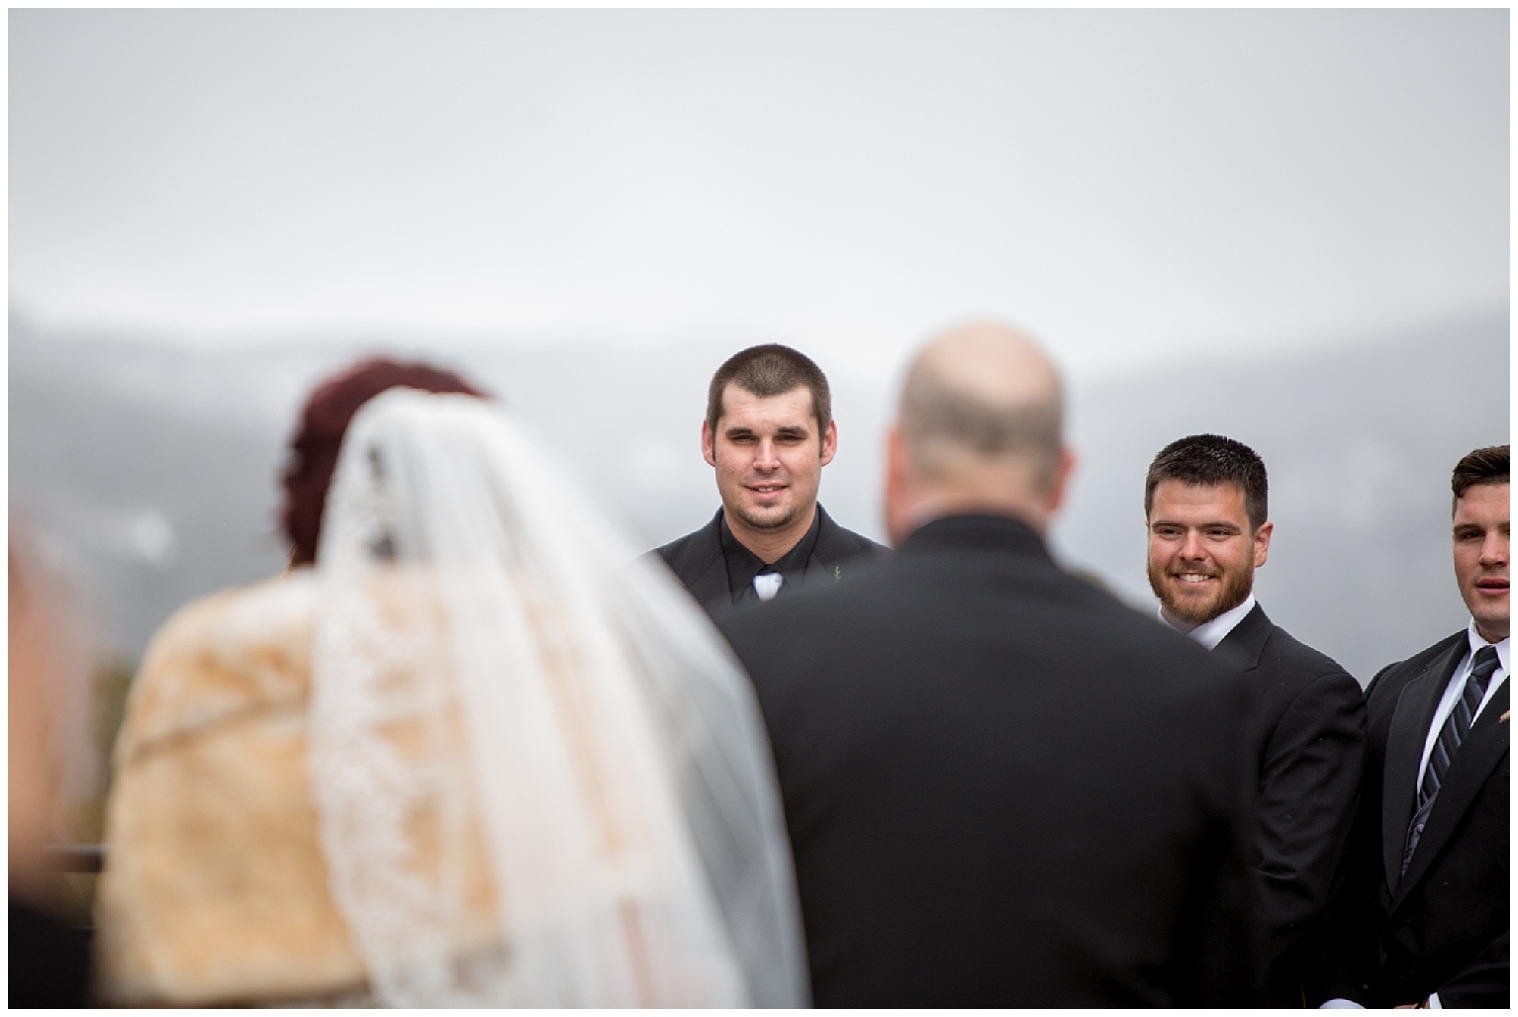 Groom looks at his bride as she is walked down the aisle by her father at a Breckenridge wedding.